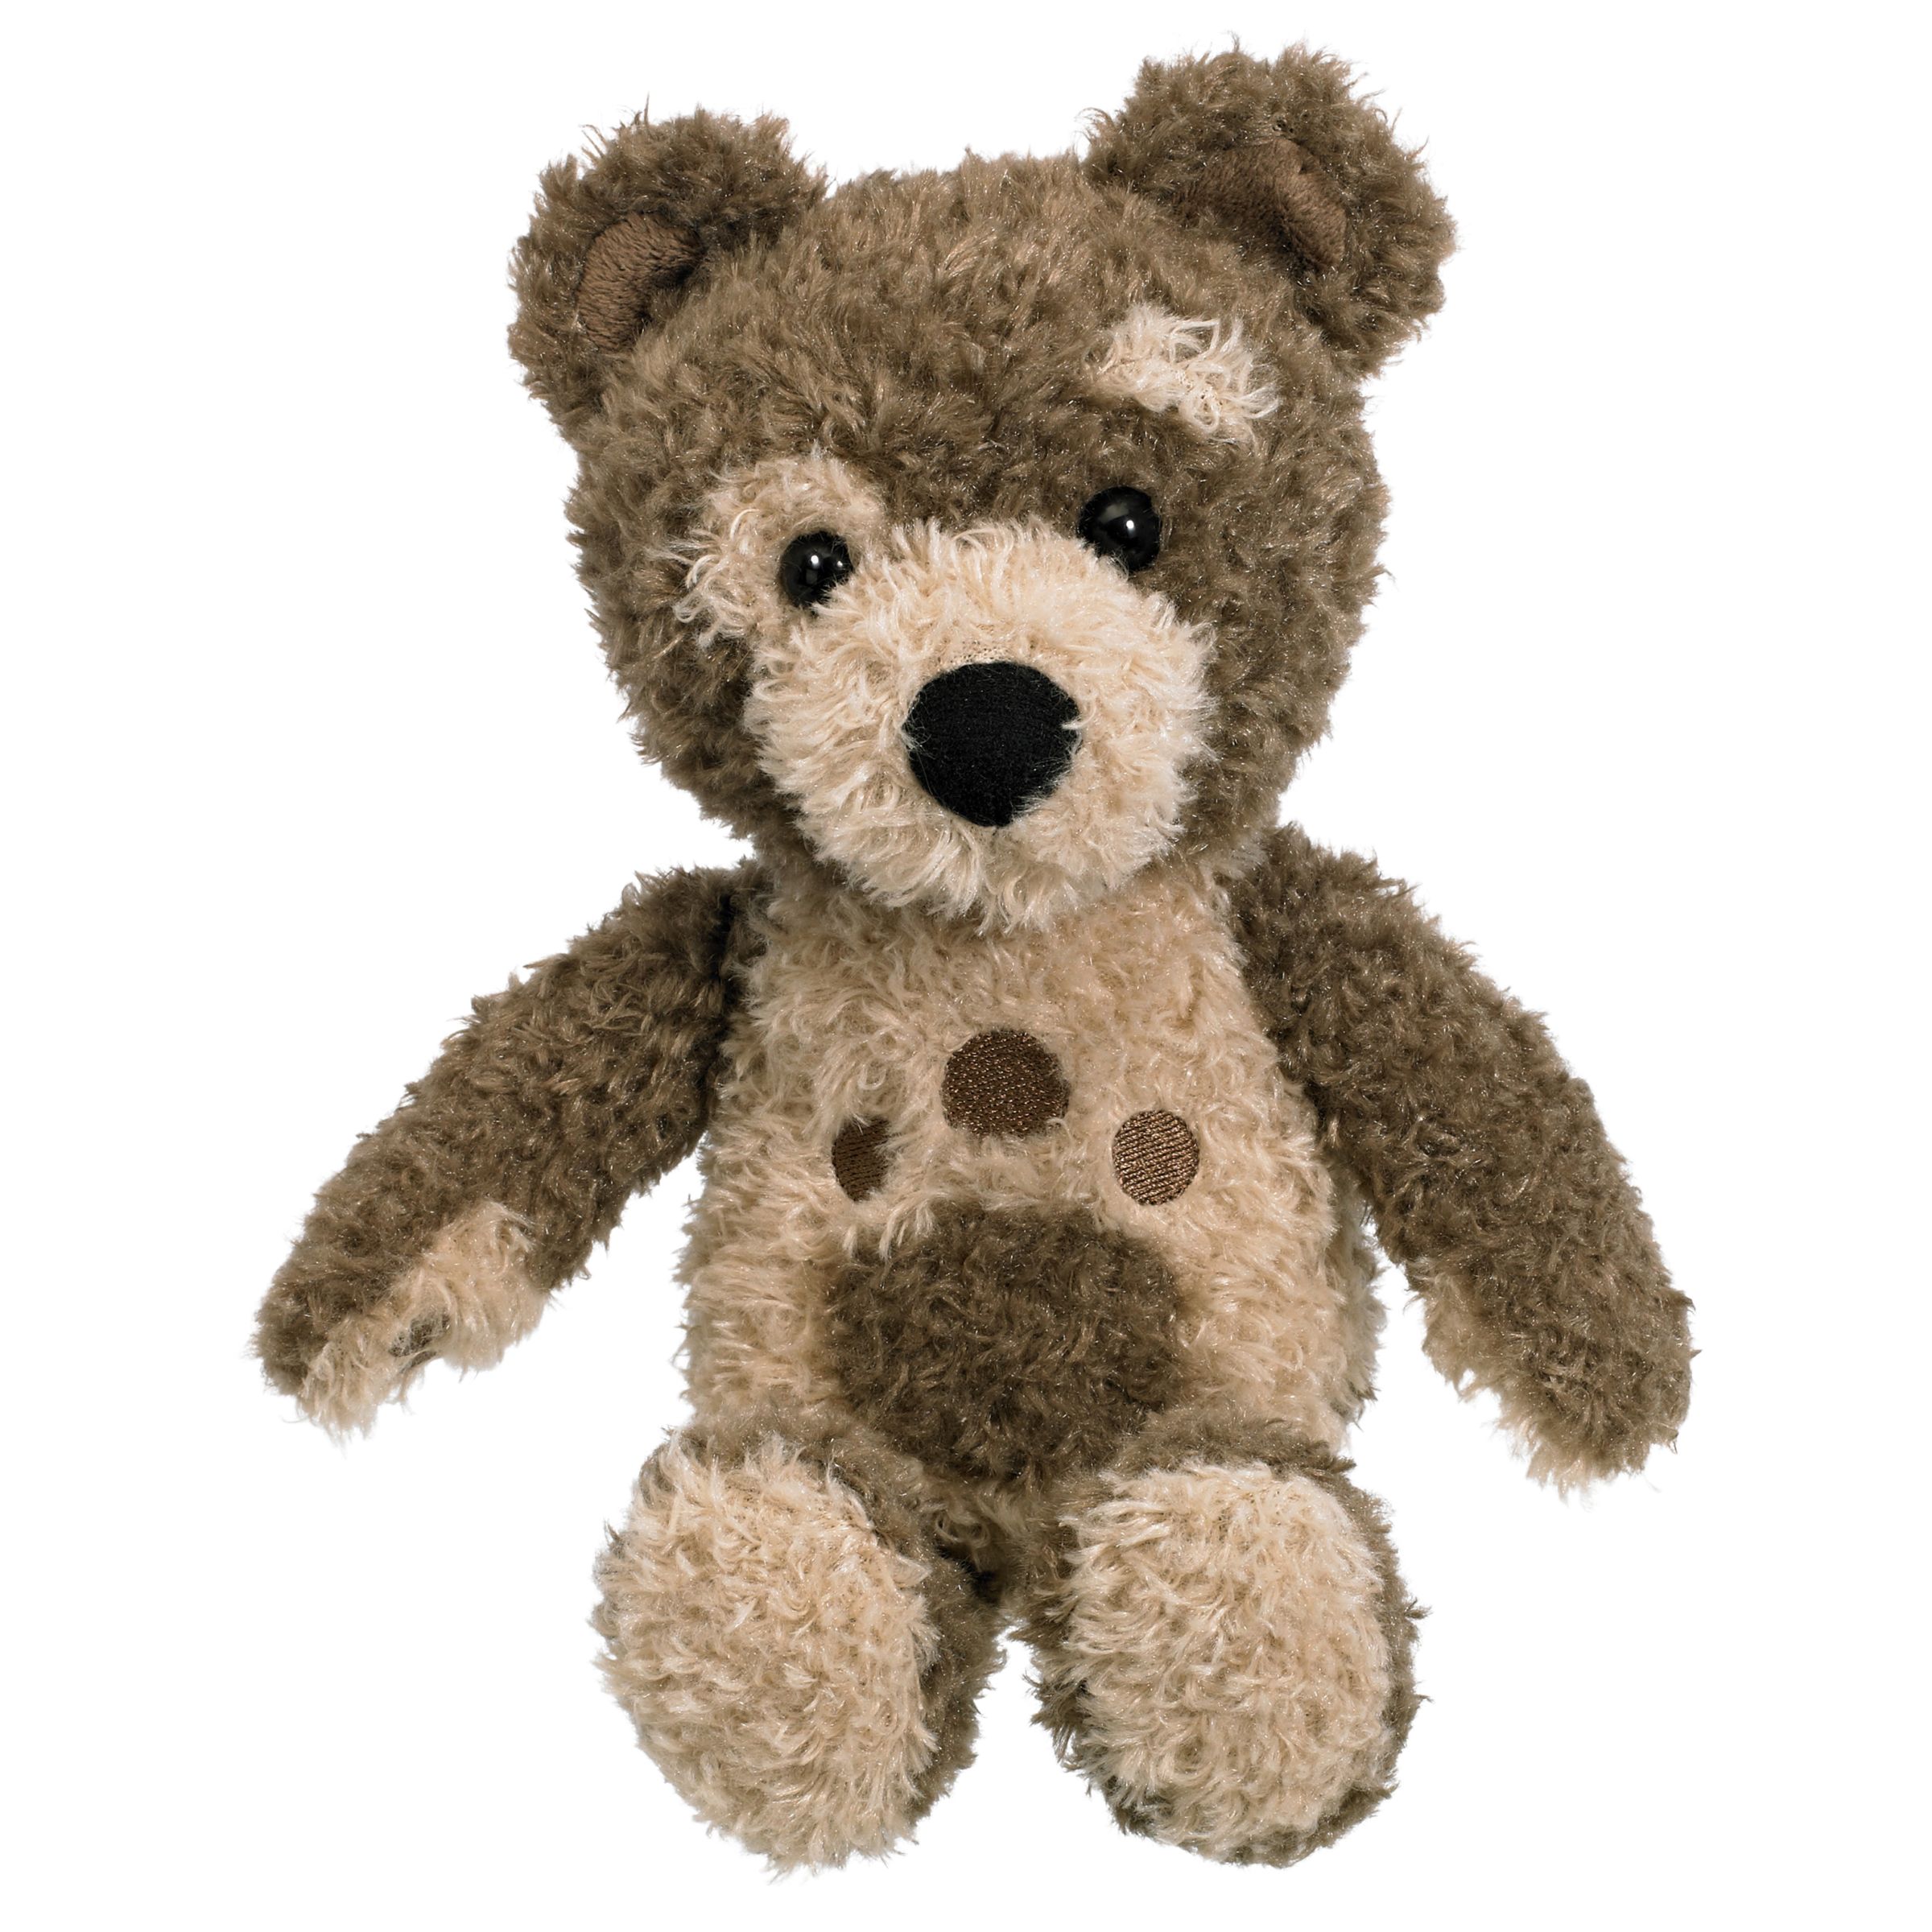 Little Charley Bear Soft Toy